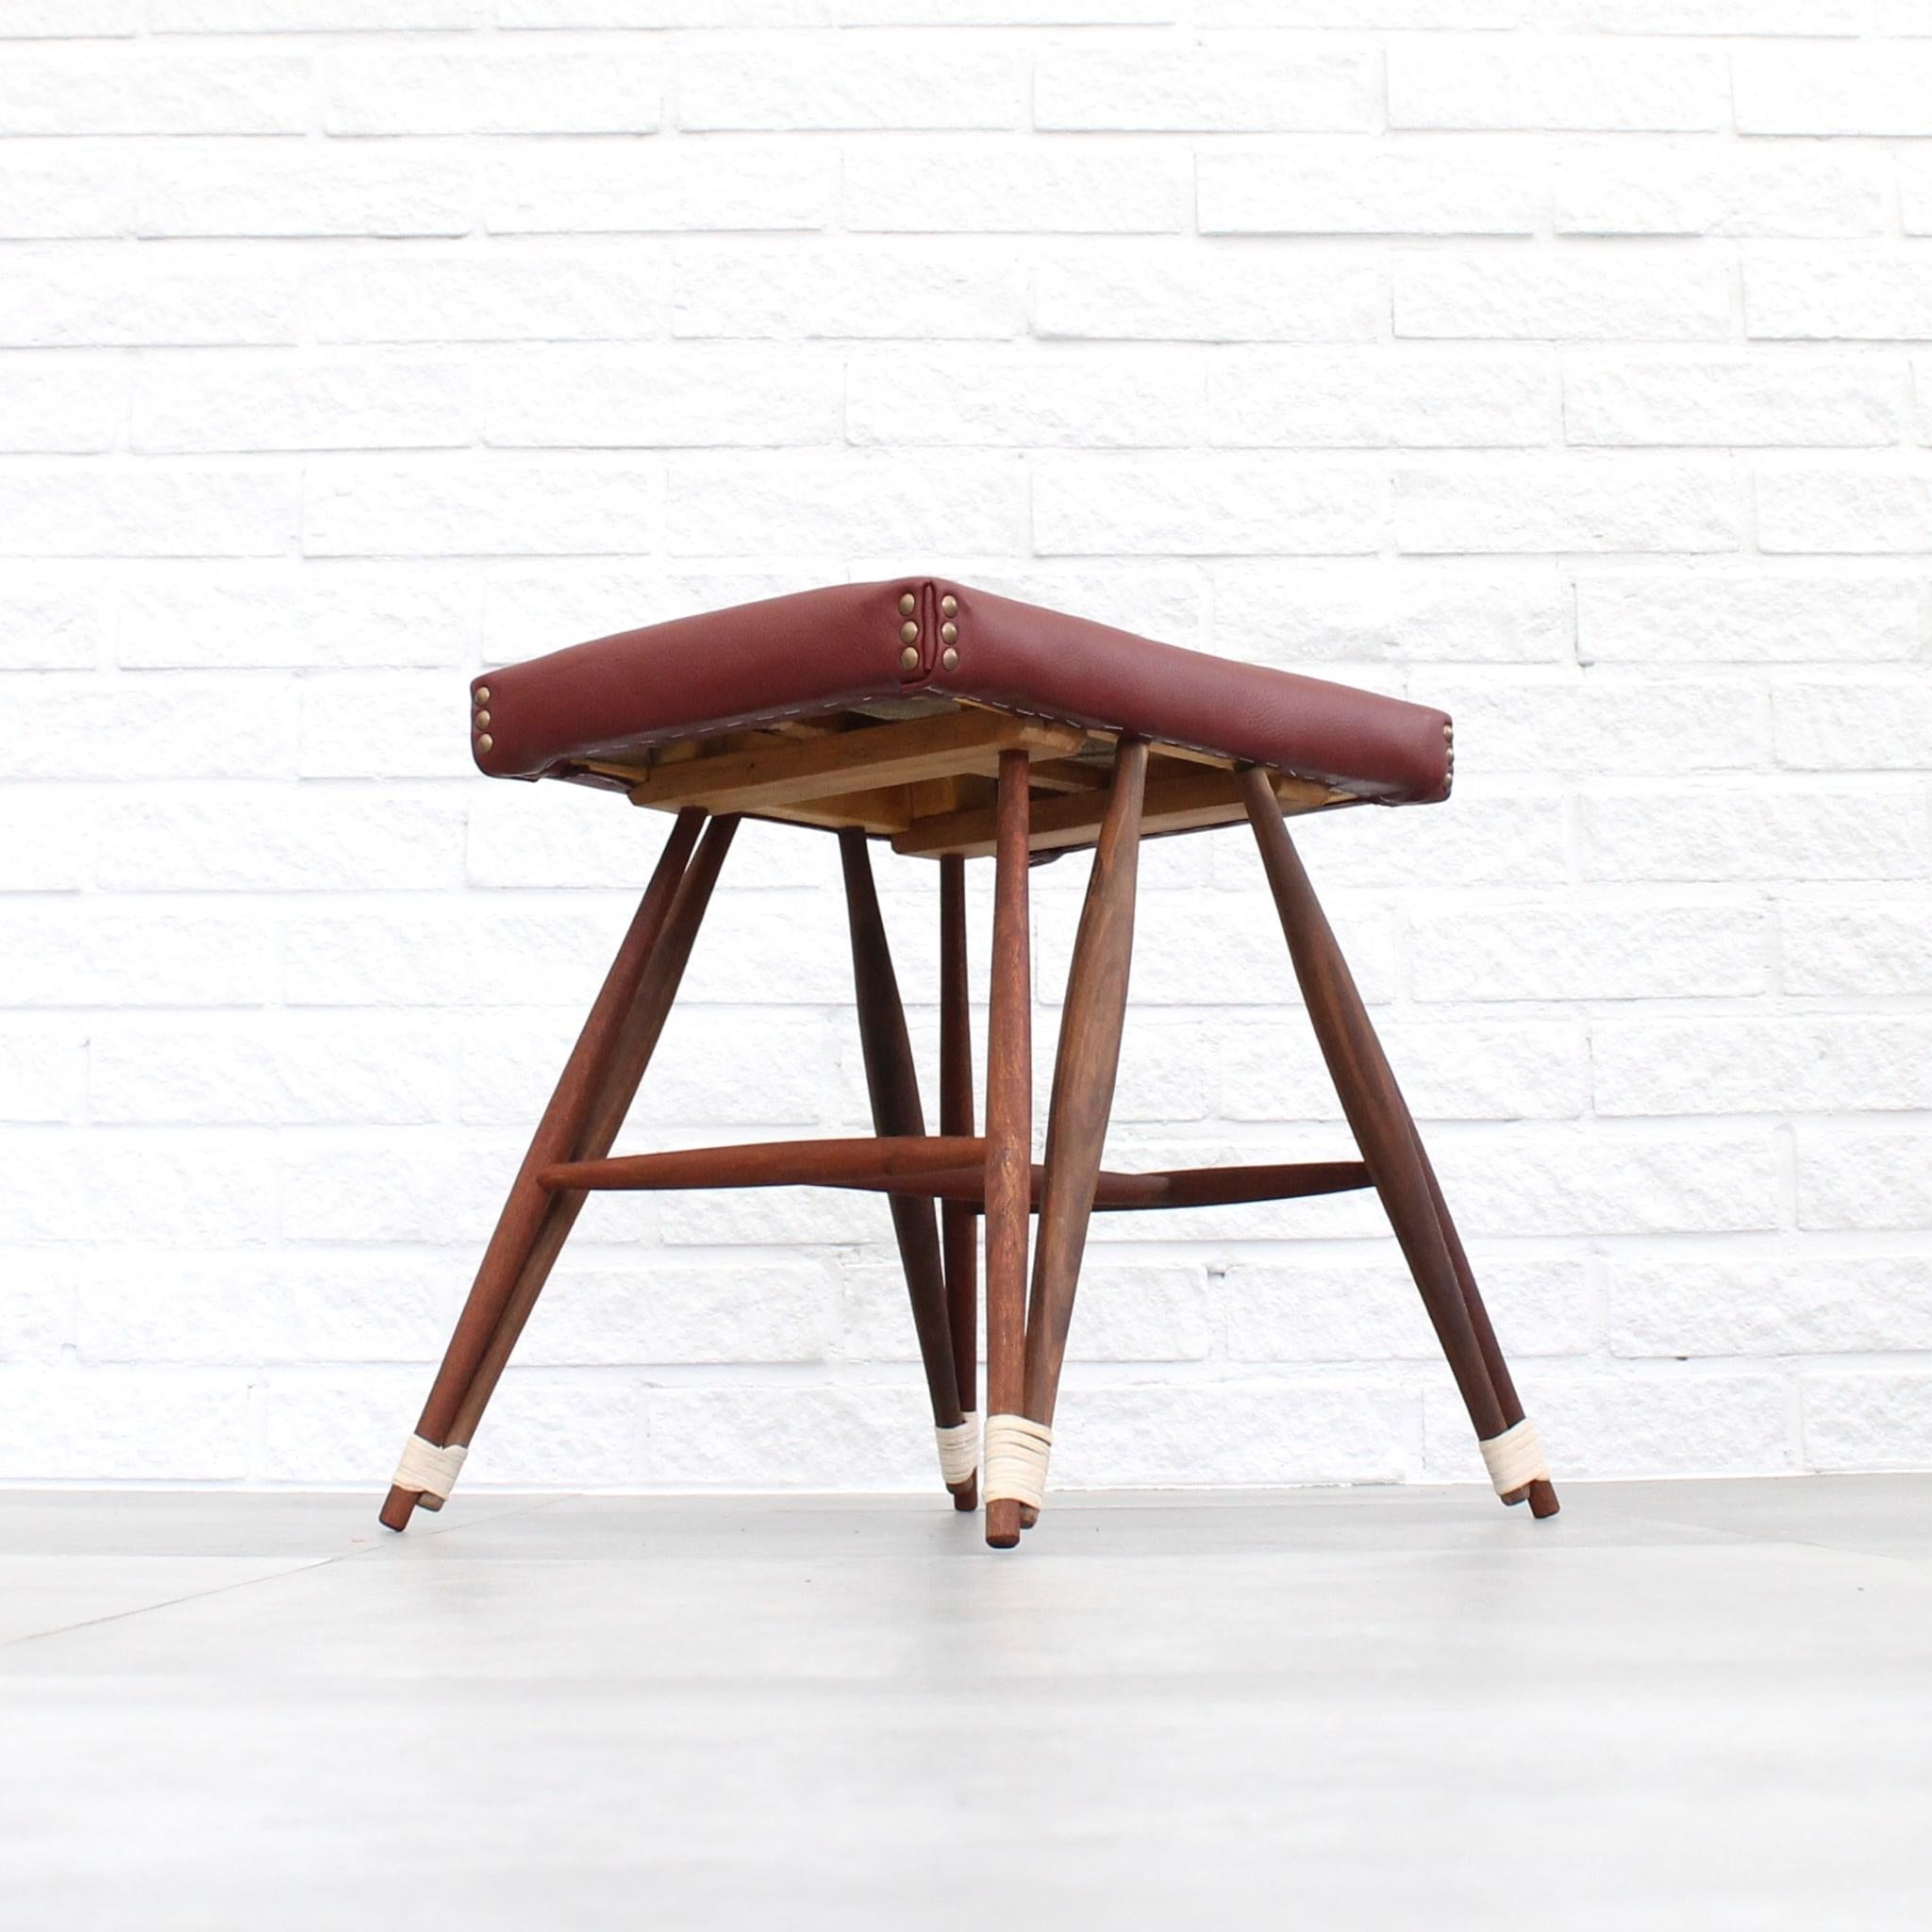 Swedish stool with eiffel base made from walnut and leather In Good Condition For Sale In Forserum, SE